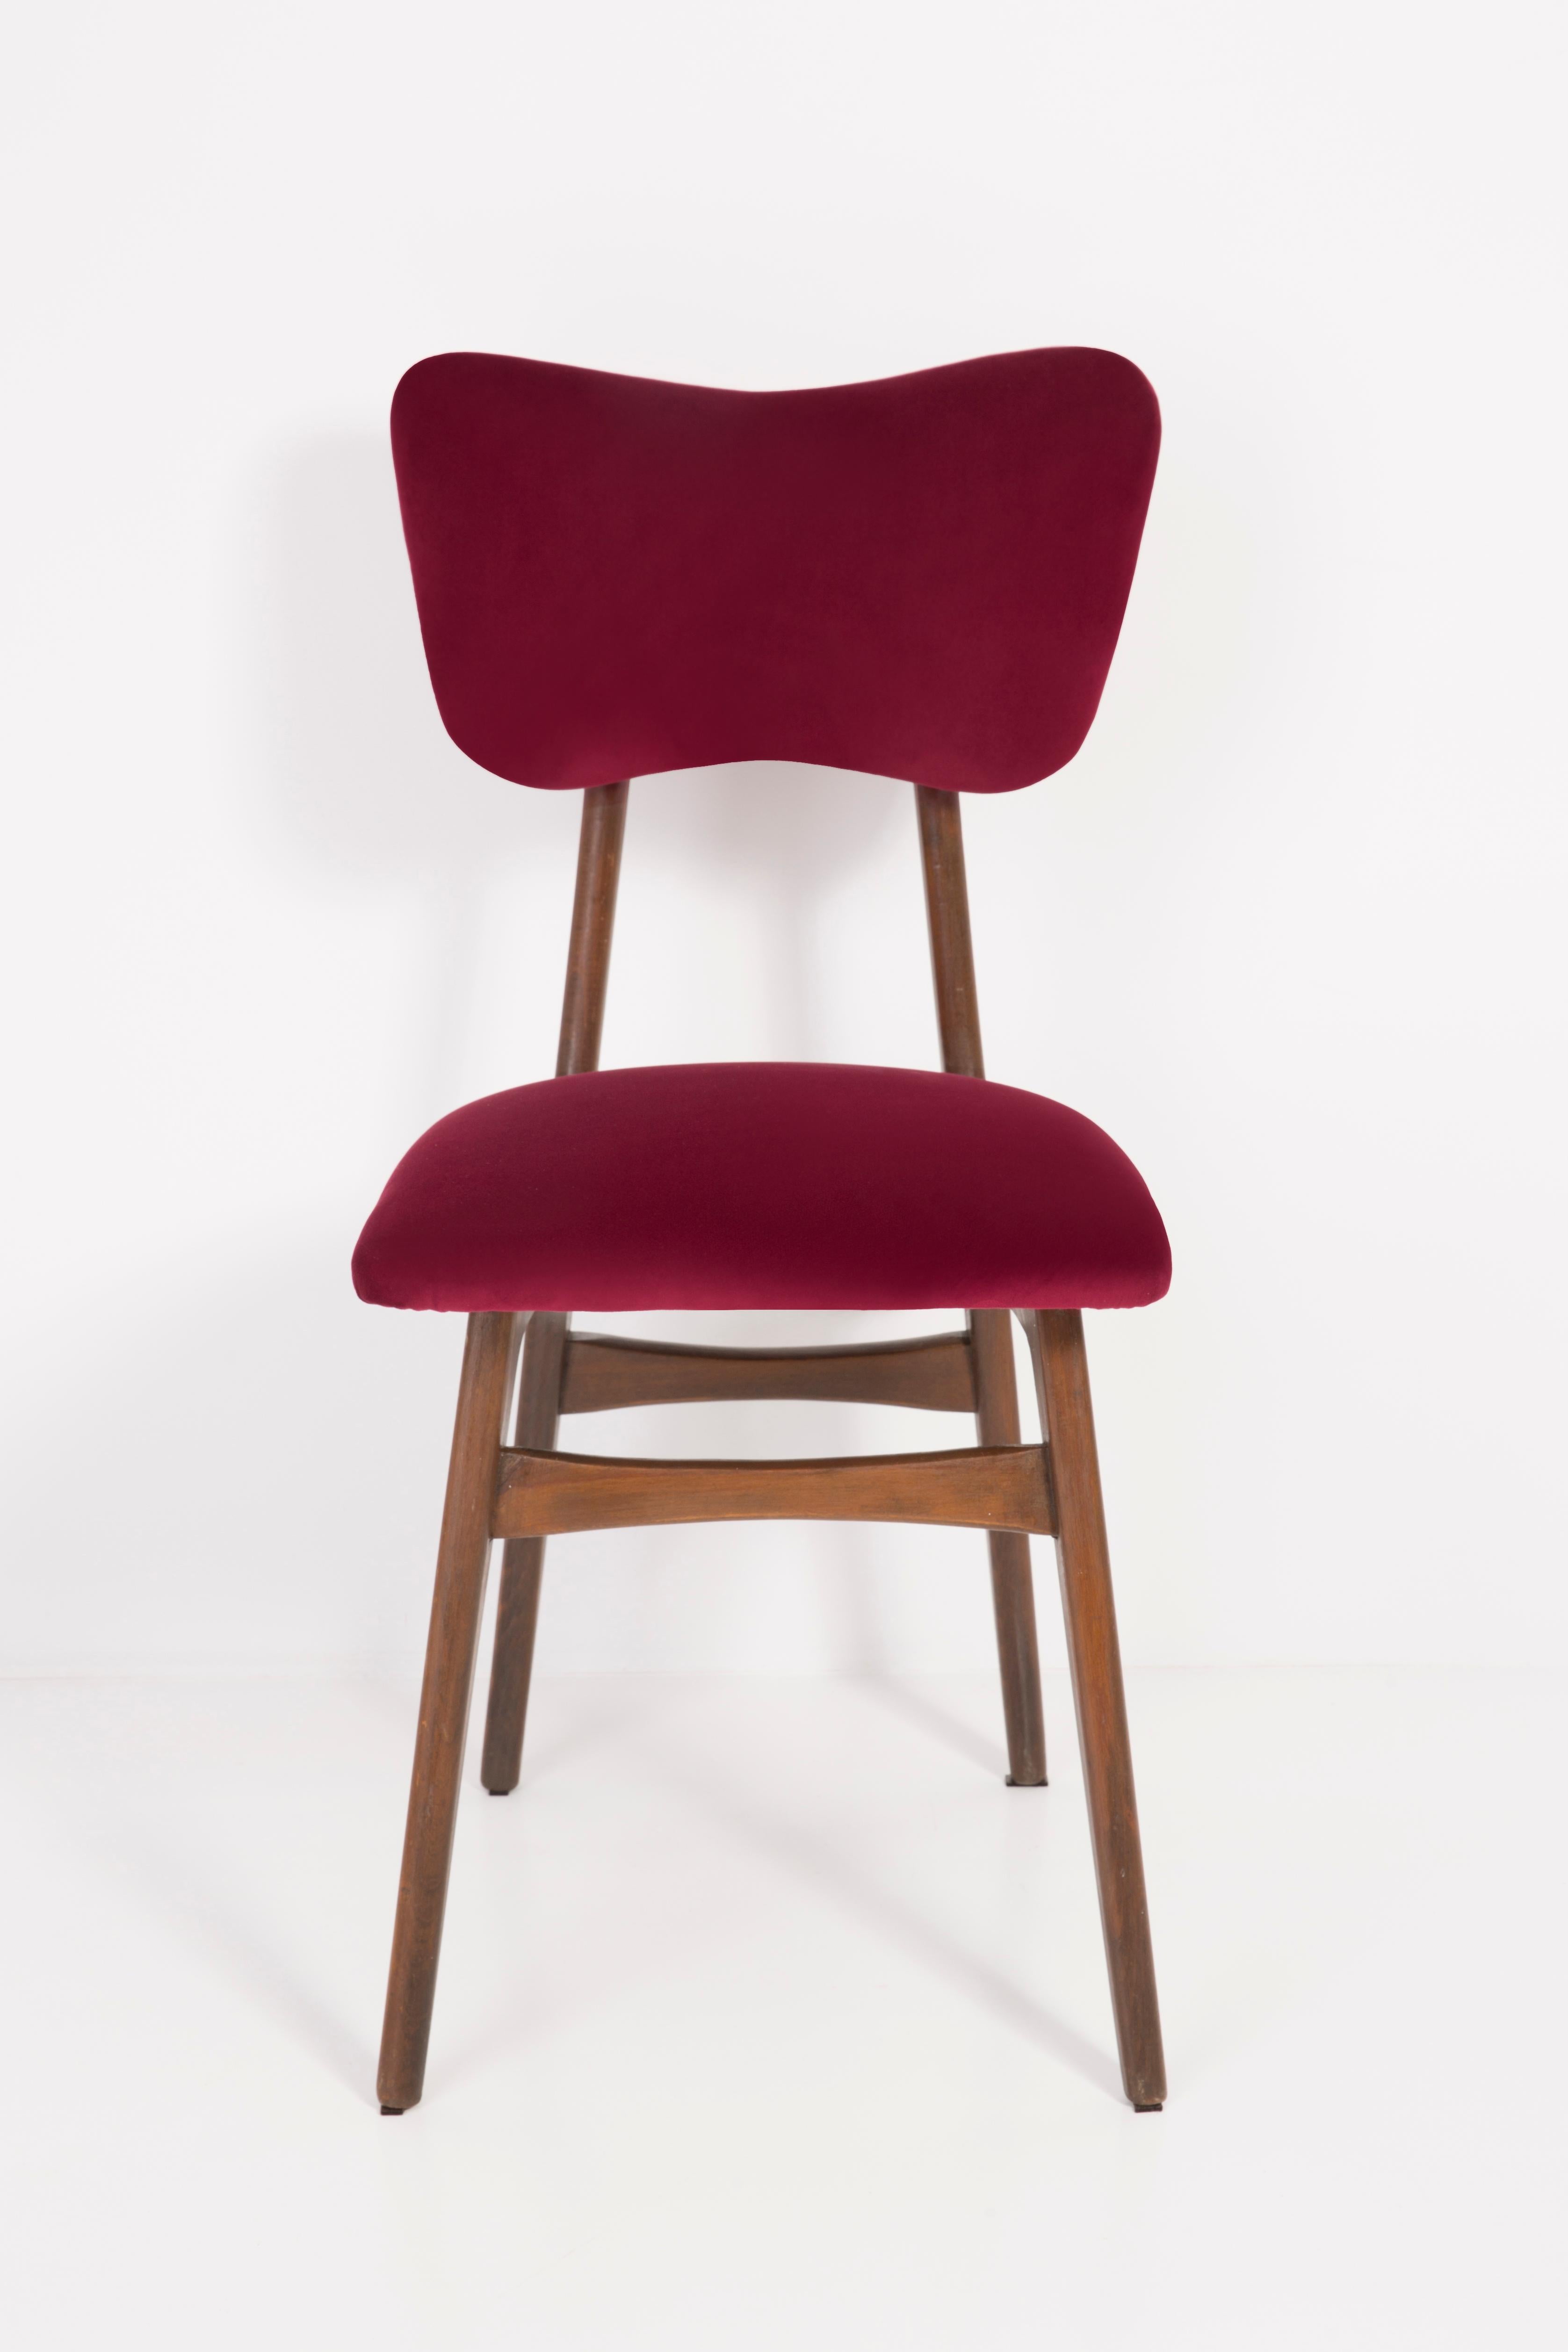 Polish Set of Twelve 20th Century Burgundy Red Chairs, 1960s For Sale